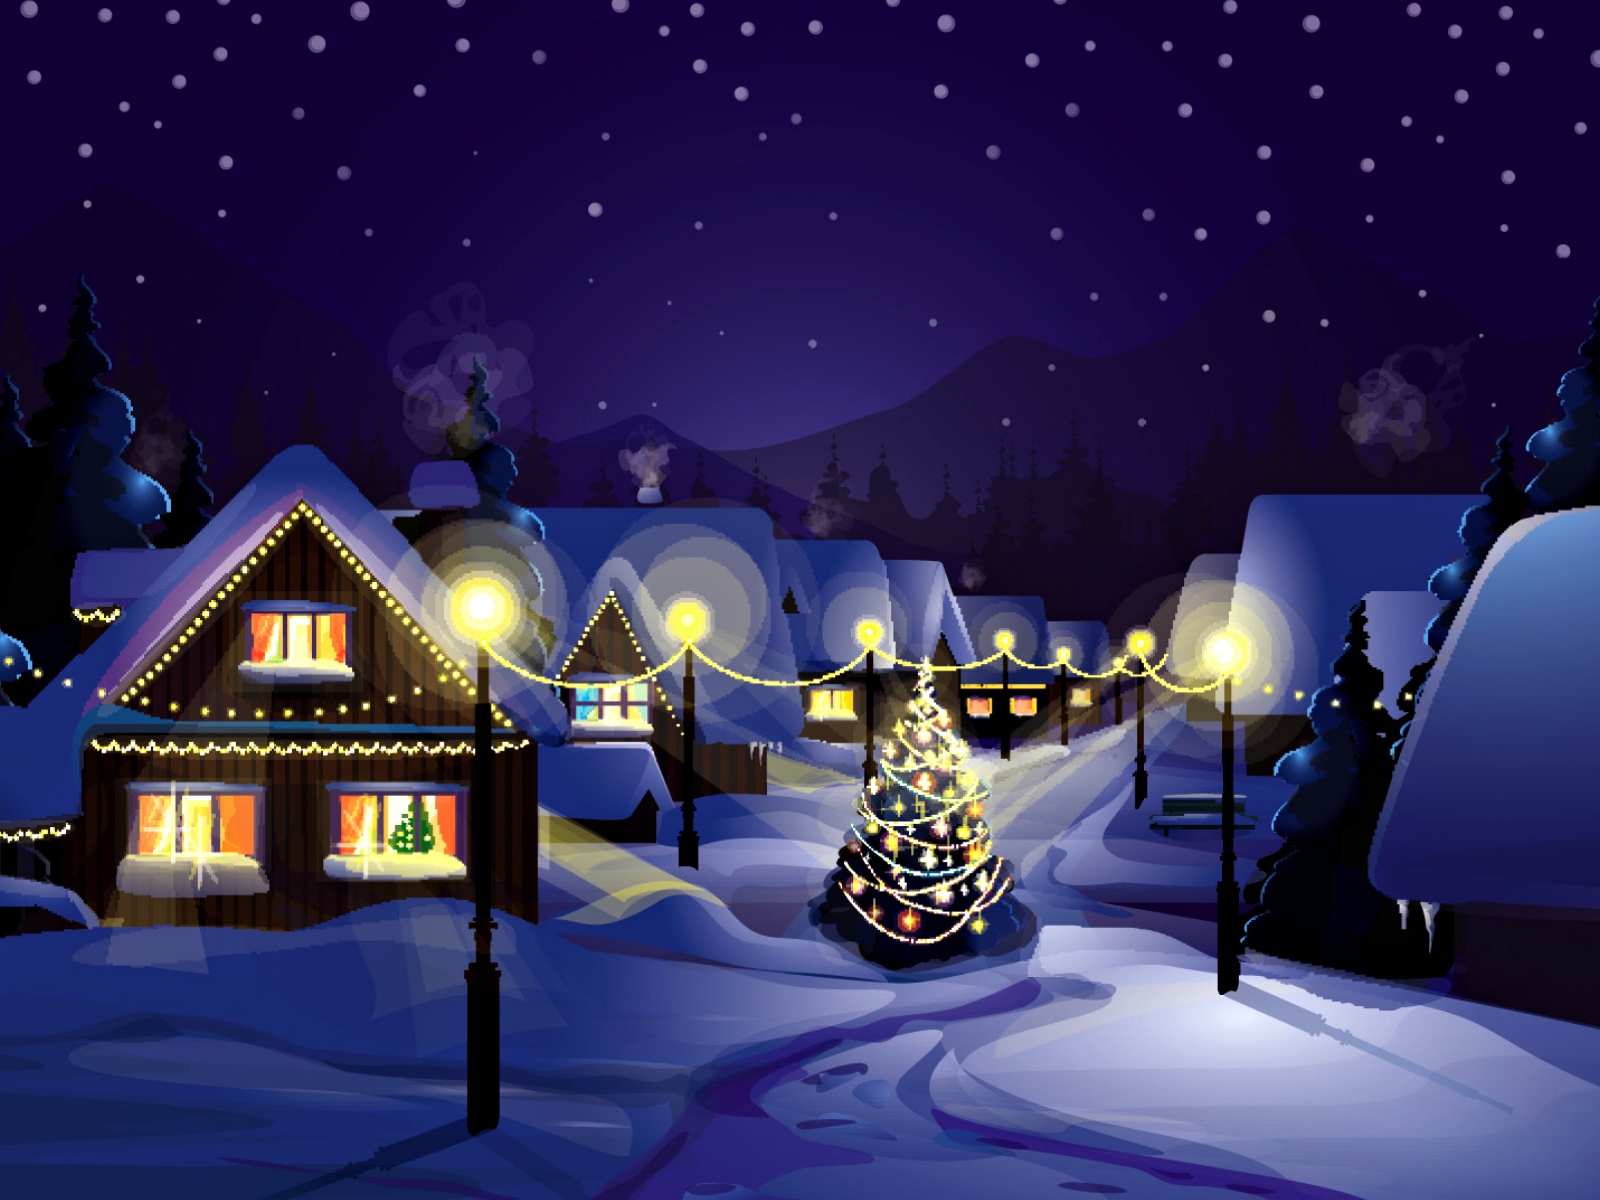 Christmas Village for 1600 x 1200 resolution